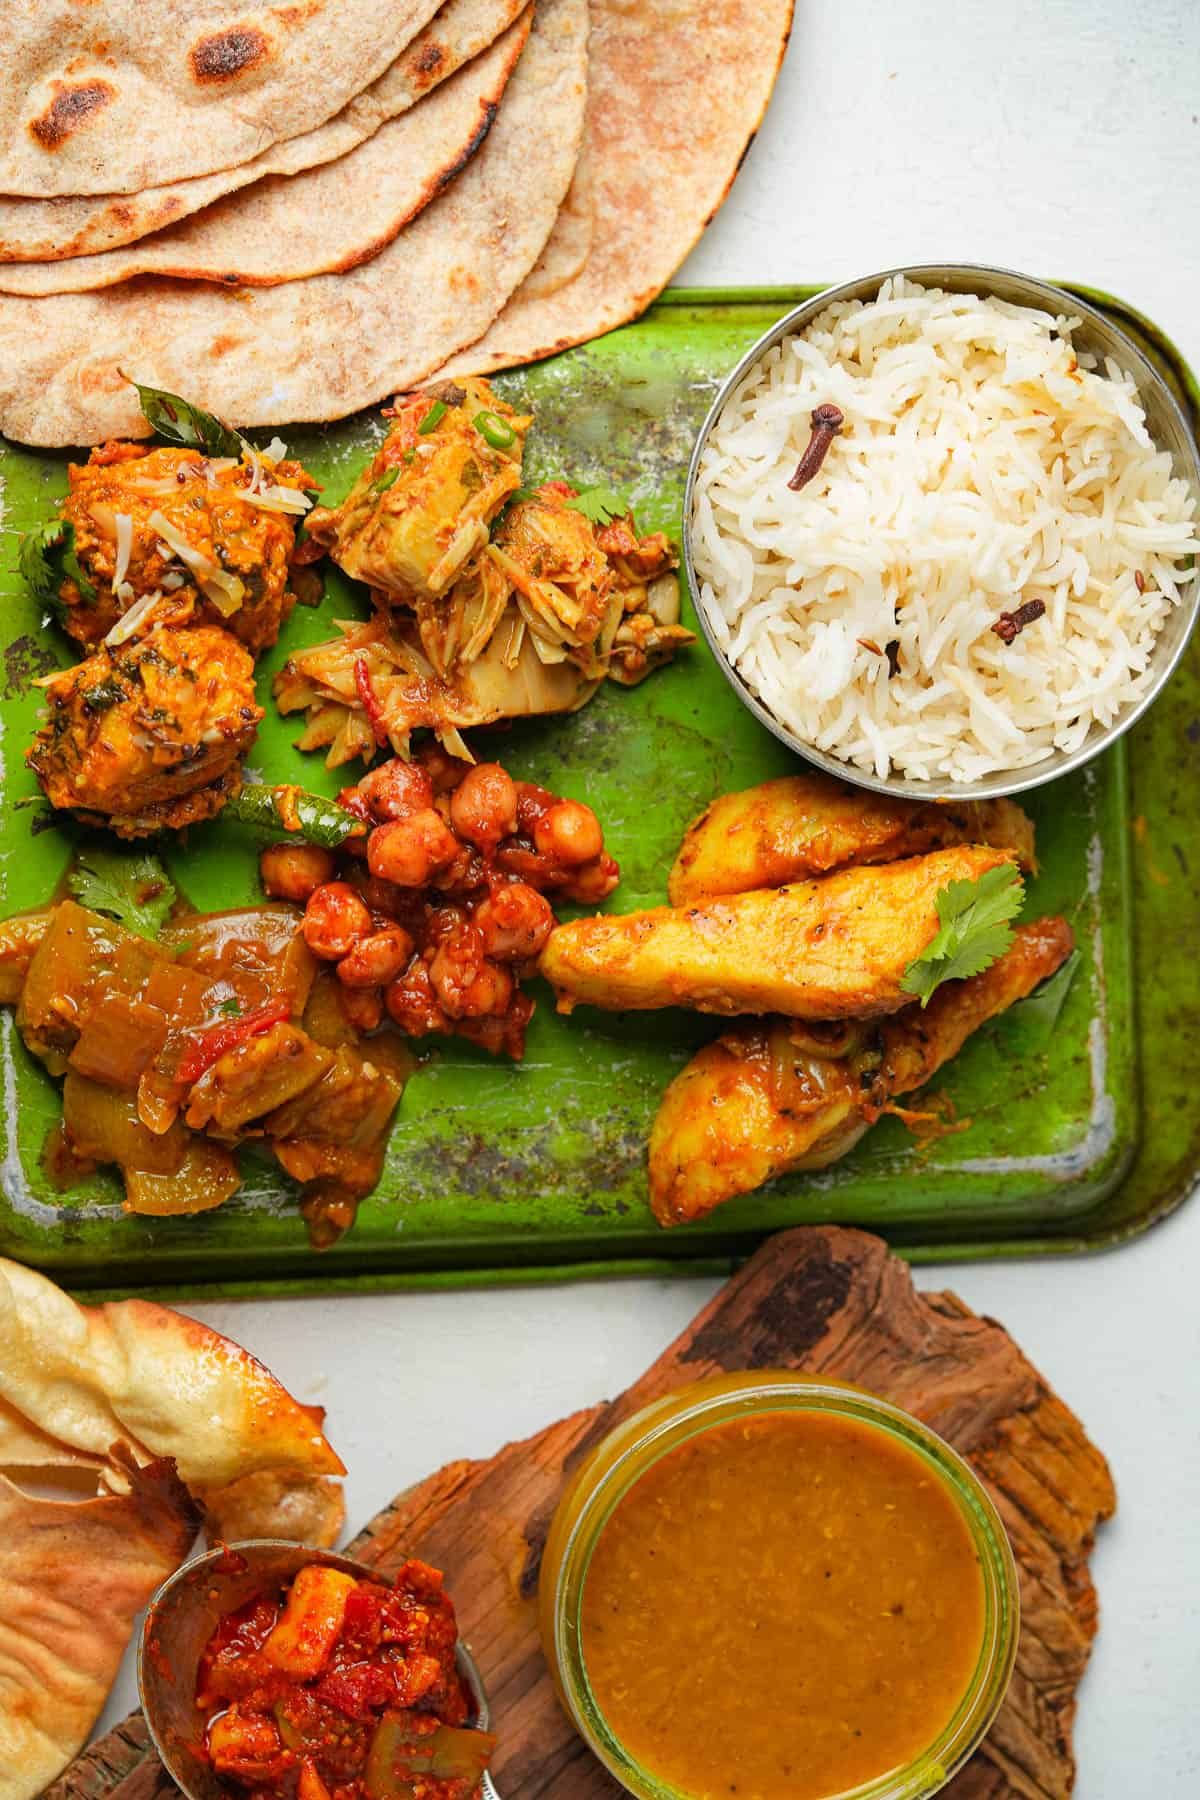 A tray with a variety of Indian food on it.